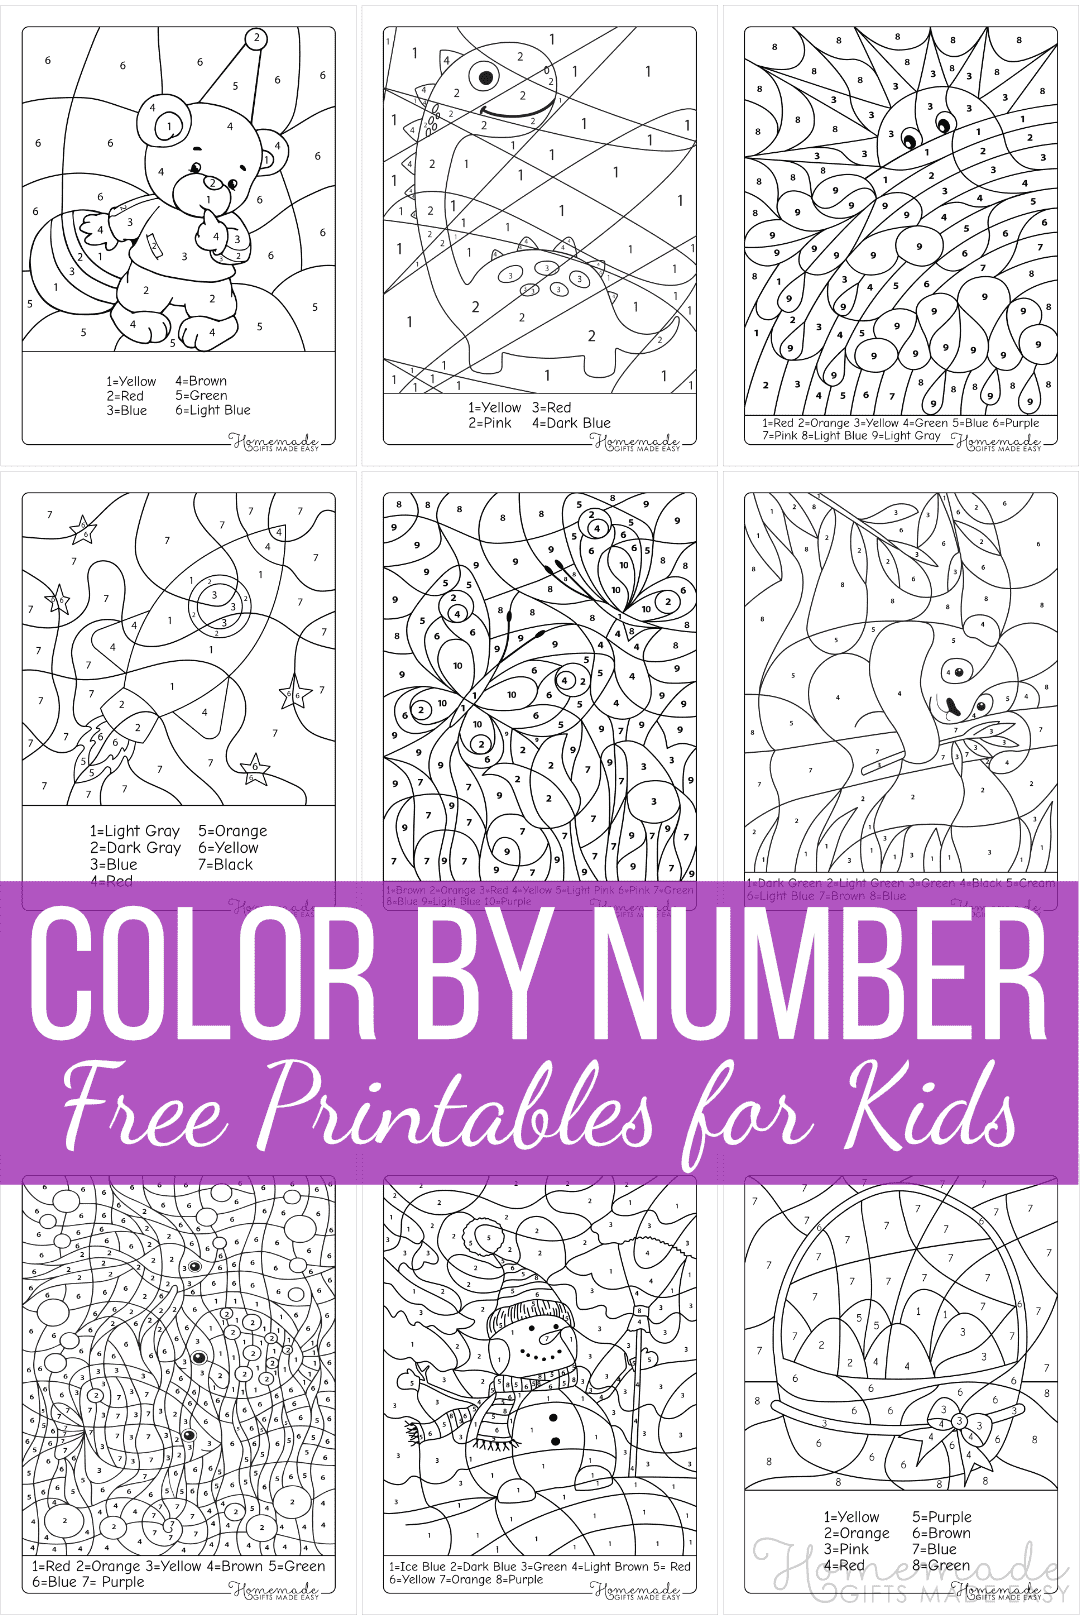 https://www.homemade-gifts-made-easy.com/image-files/color-by-number-printable-montage-1080x1620.png